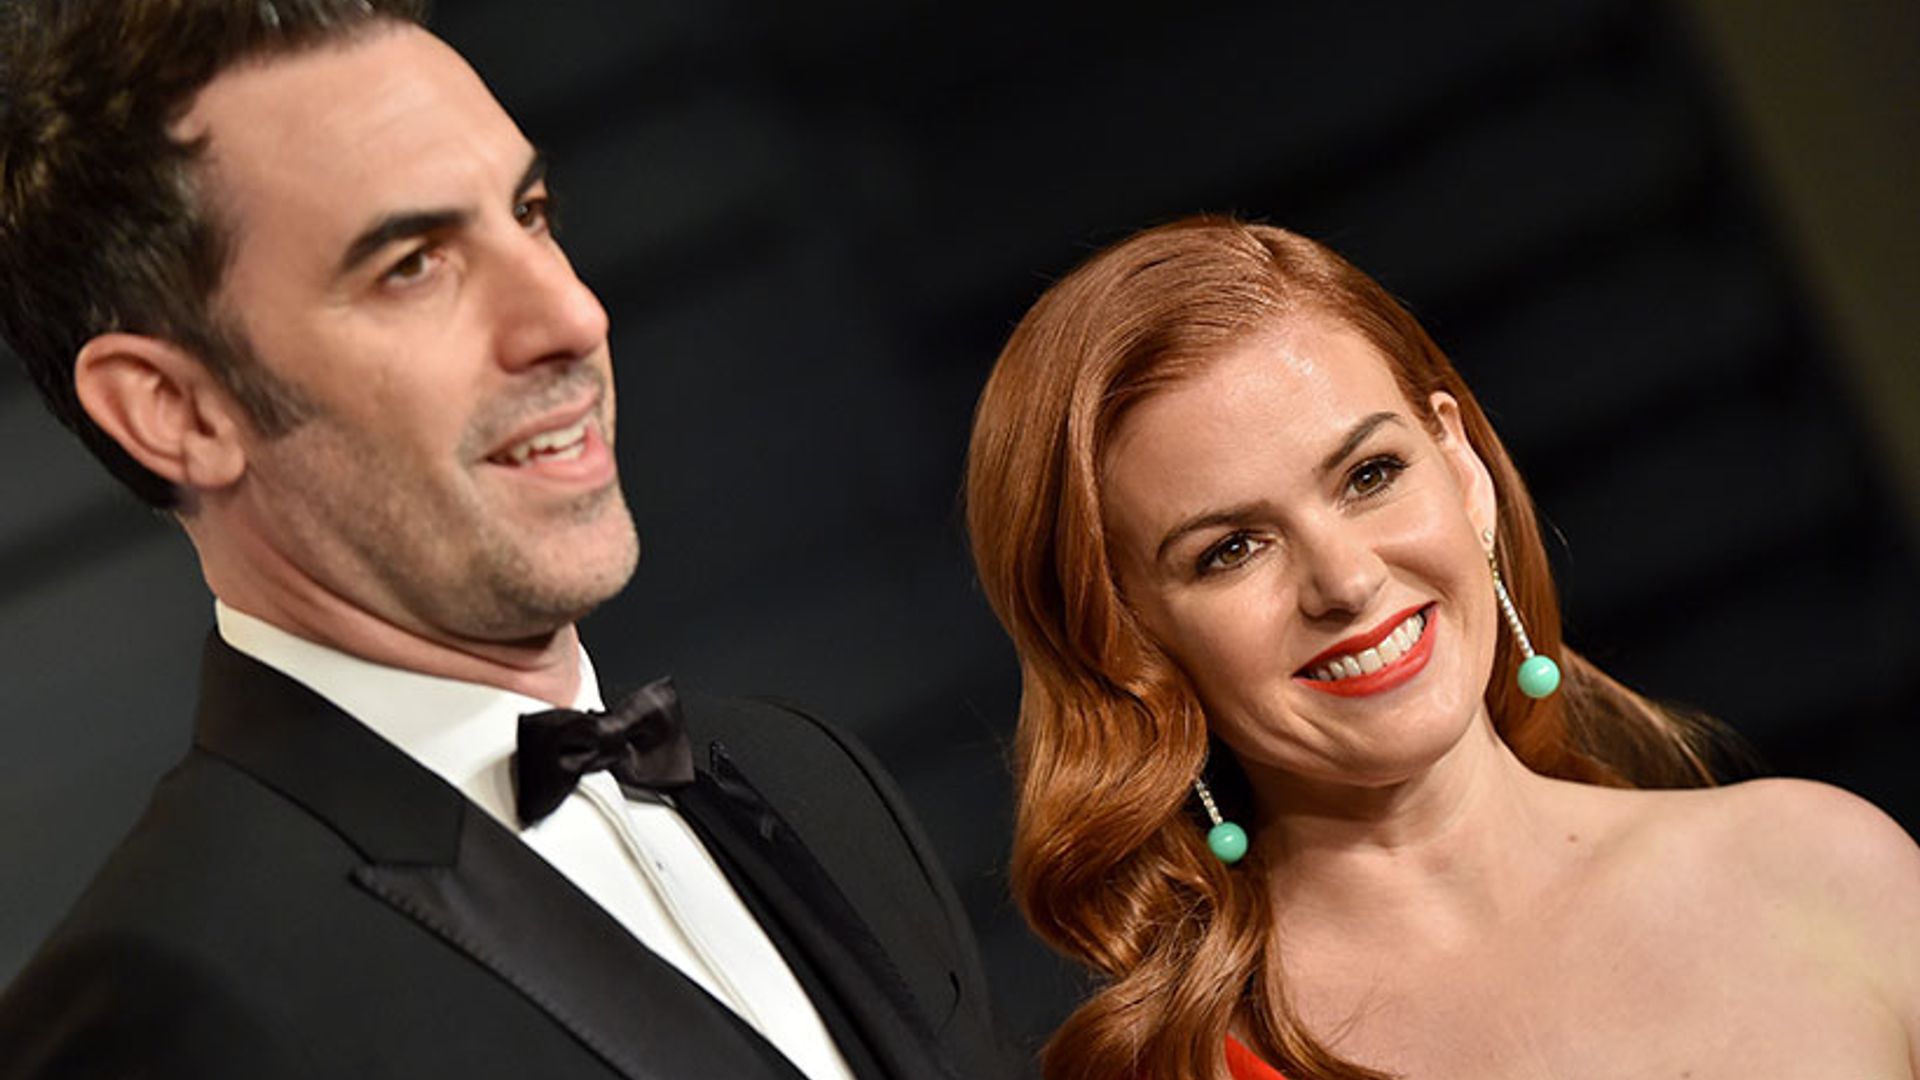 Everything you need to know about Sacha Baron Cohen's wife